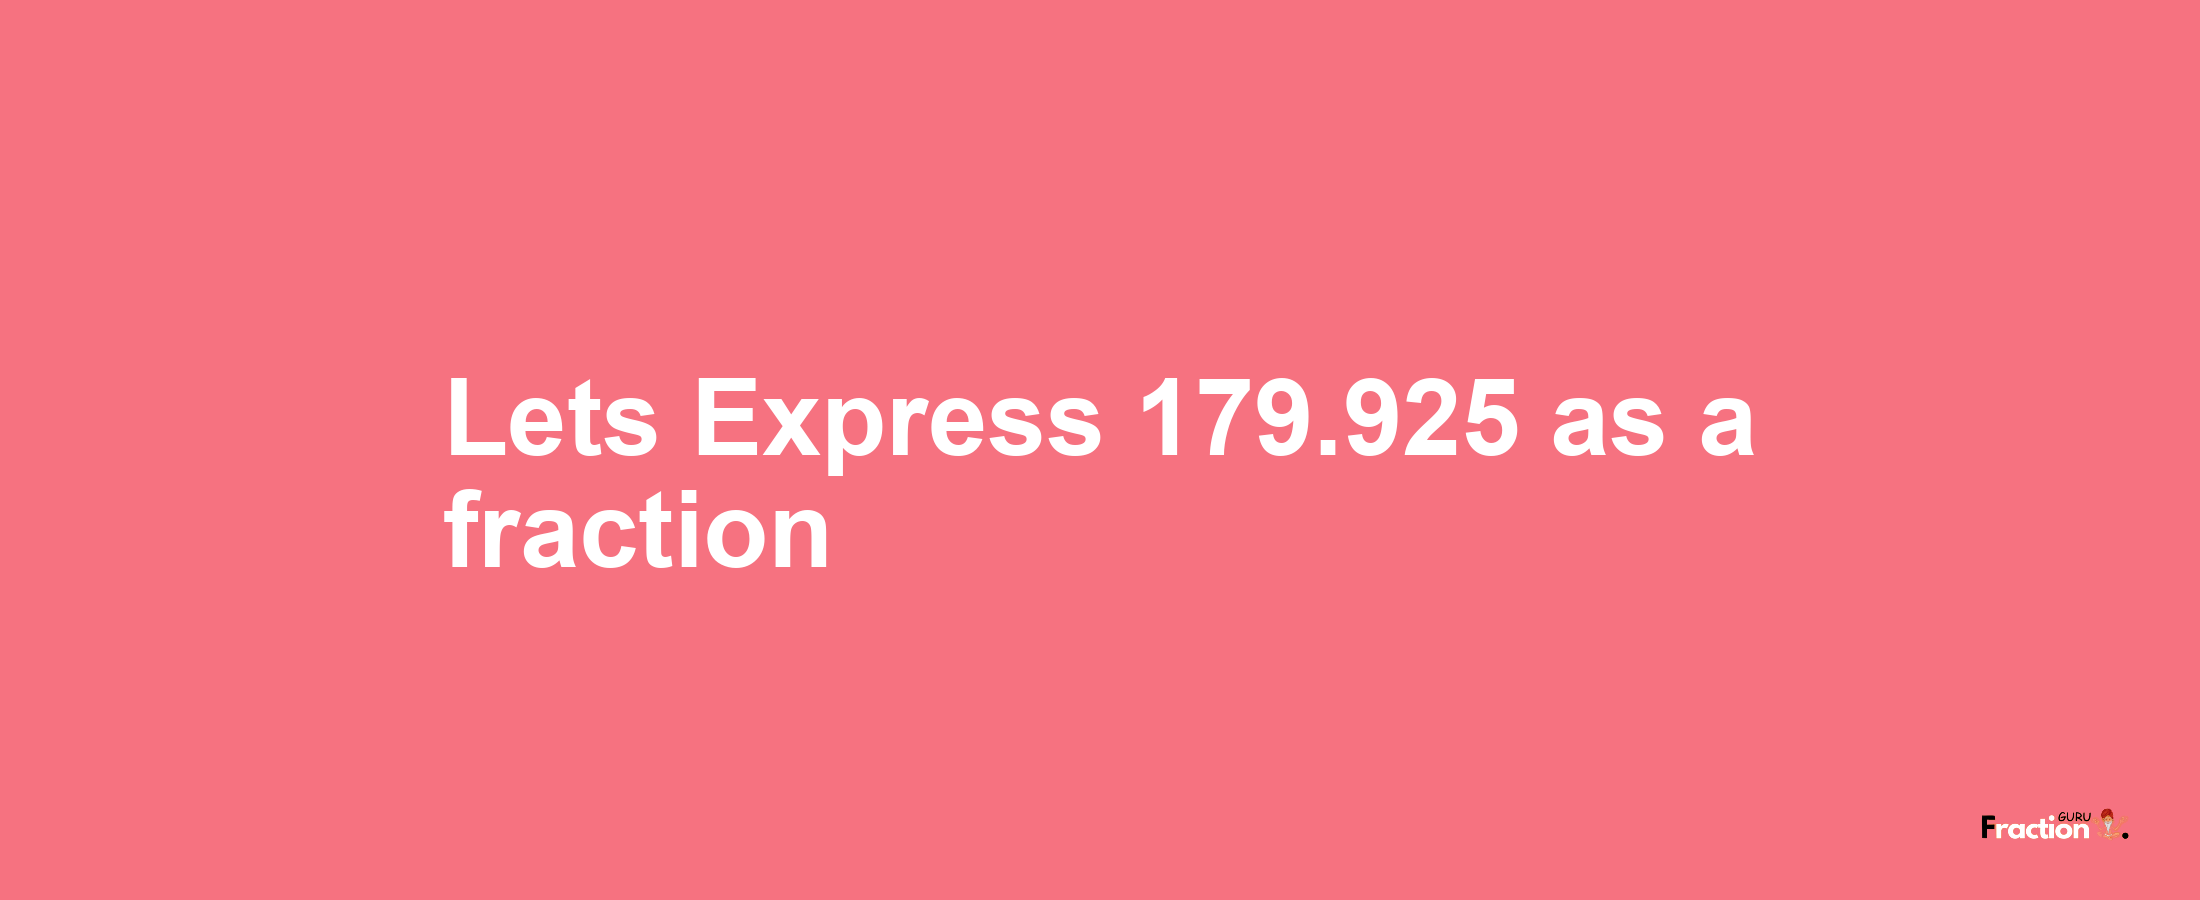 Lets Express 179.925 as afraction